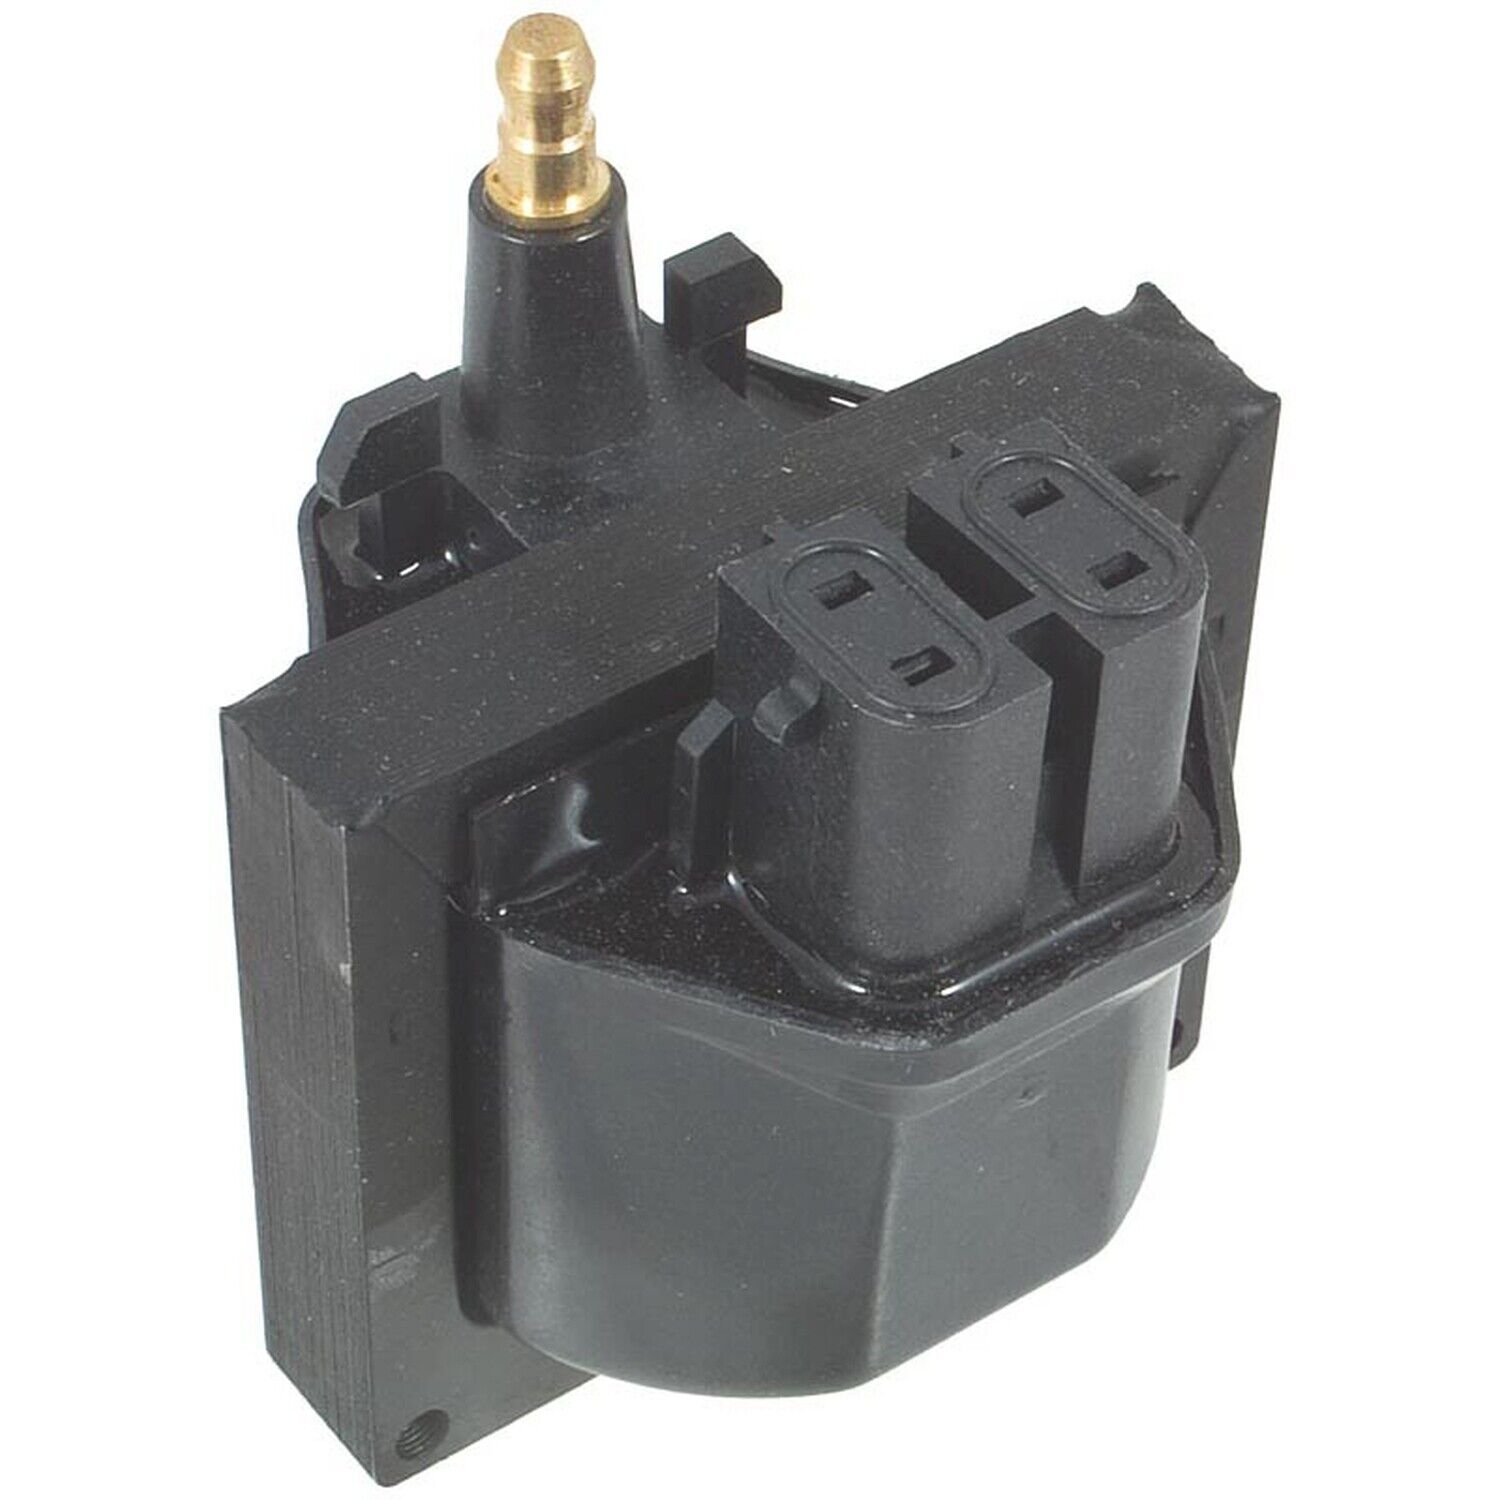 New Ignition Coil For Buick,Cadillac,Chevrolet,GMC,Jeep,Oldsmobile 1985-1997